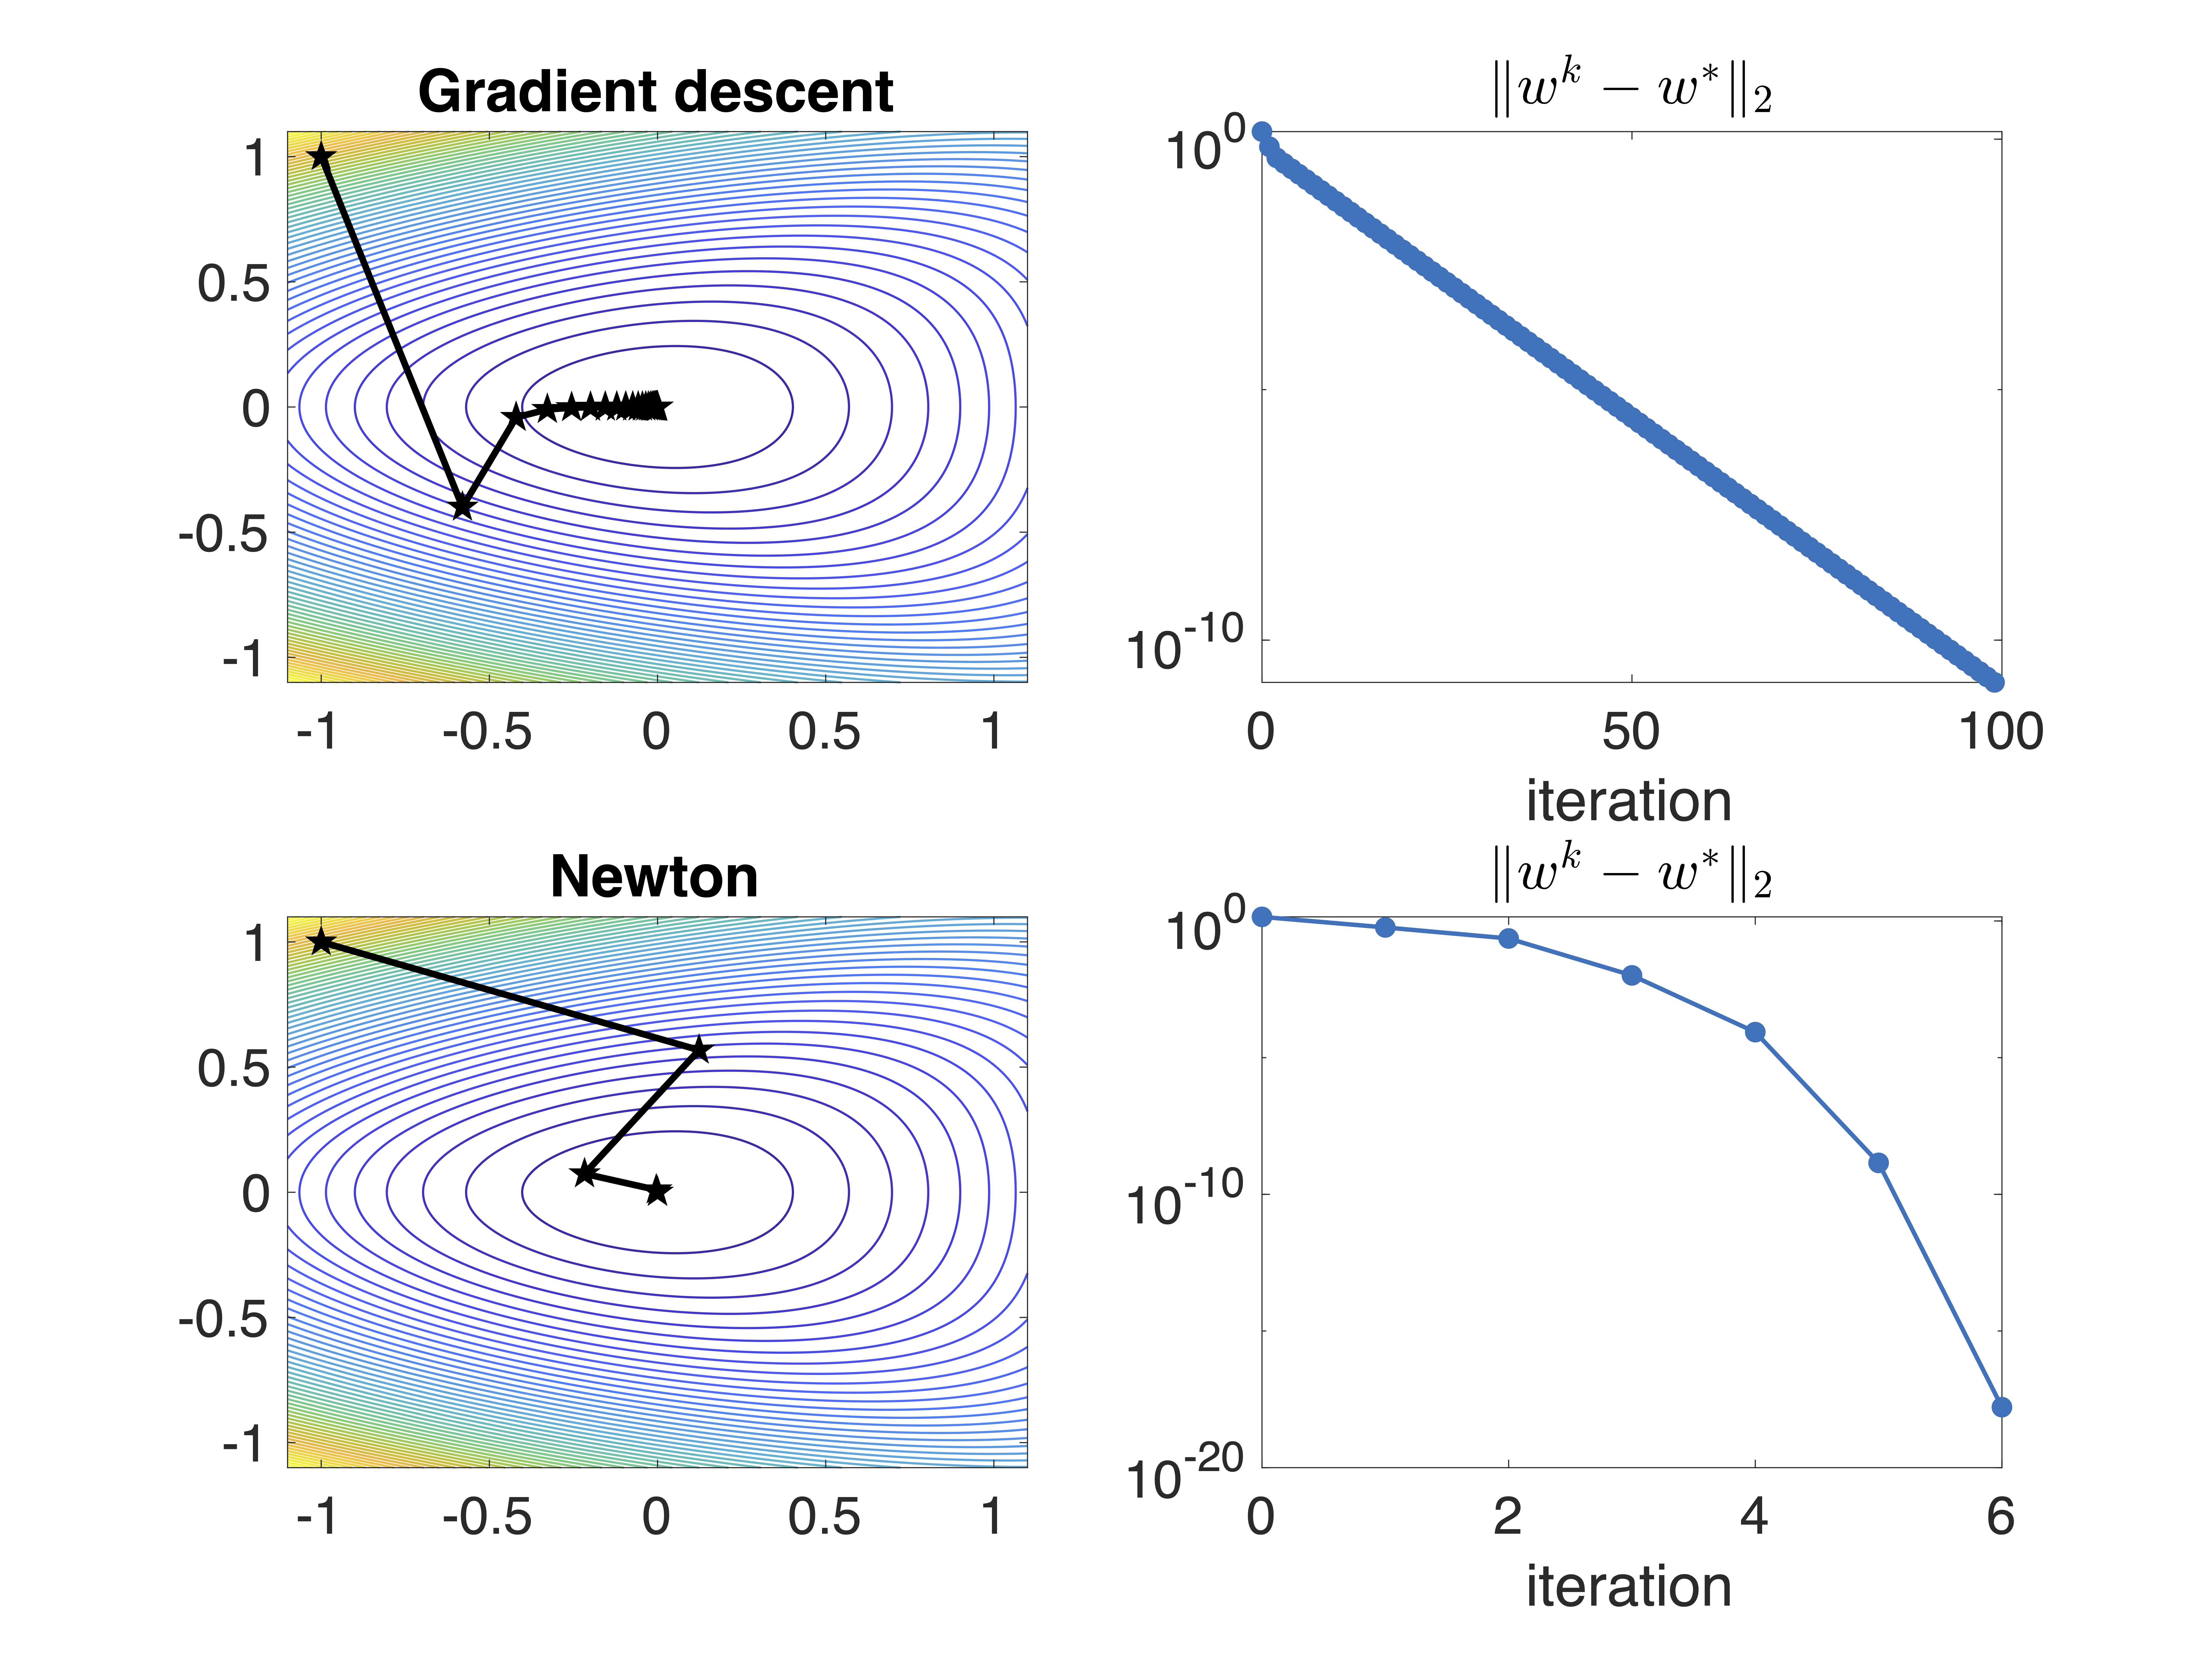 Figure 4: Comparison of gradient descent and Newton’s method; in this case the function and starting point are favorable to Newton’s method.